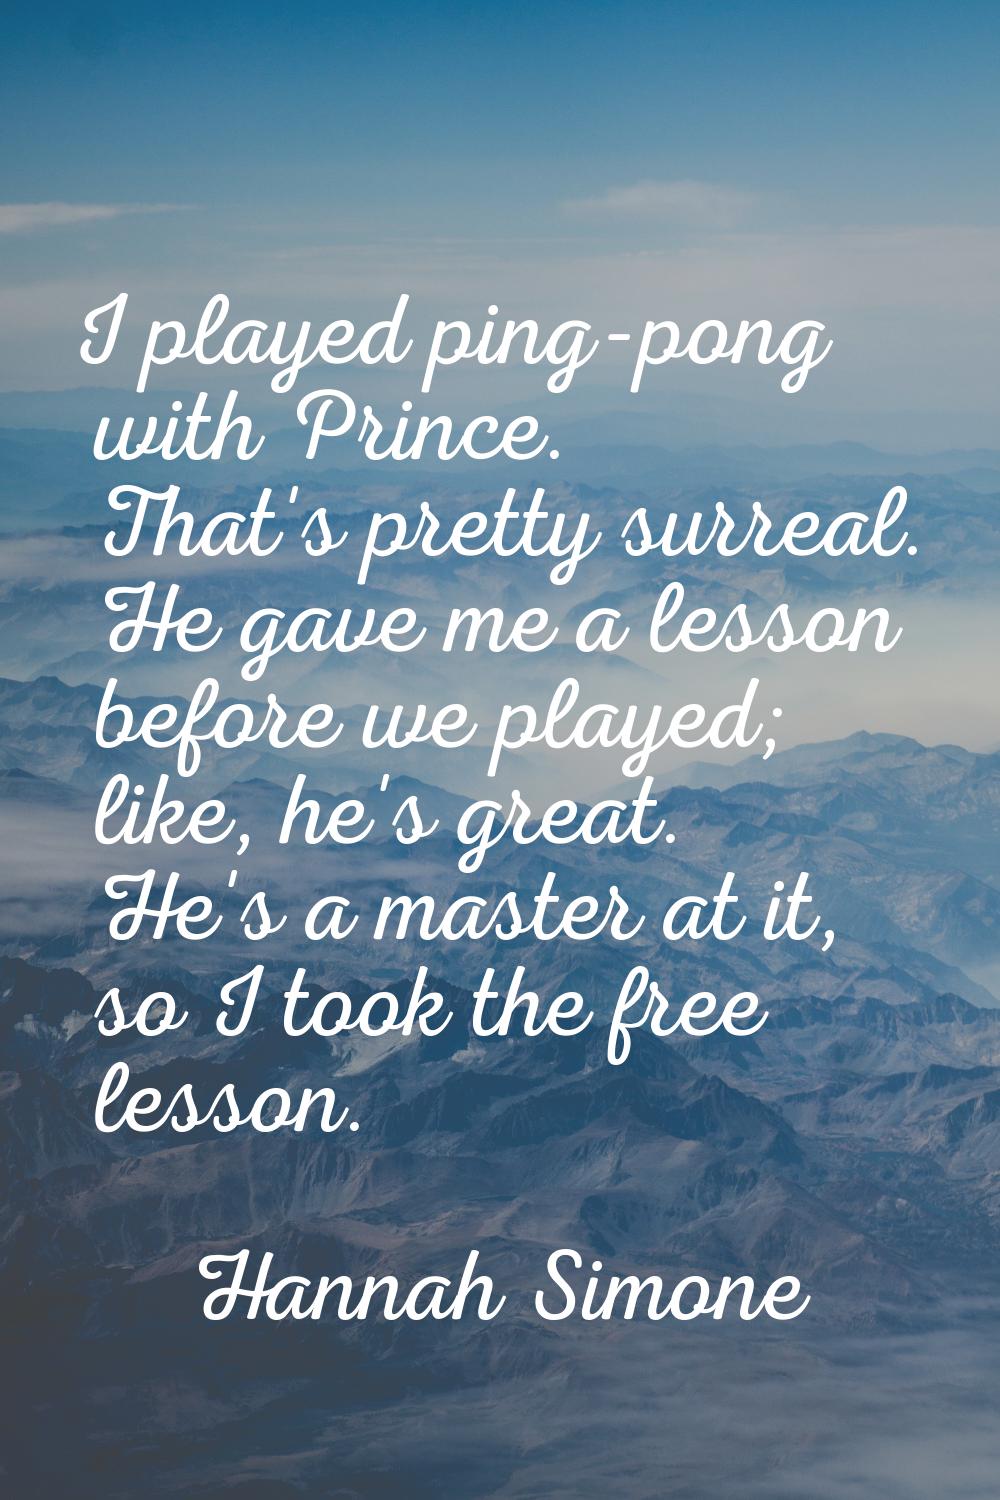 I played ping-pong with Prince. That's pretty surreal. He gave me a lesson before we played; like, 